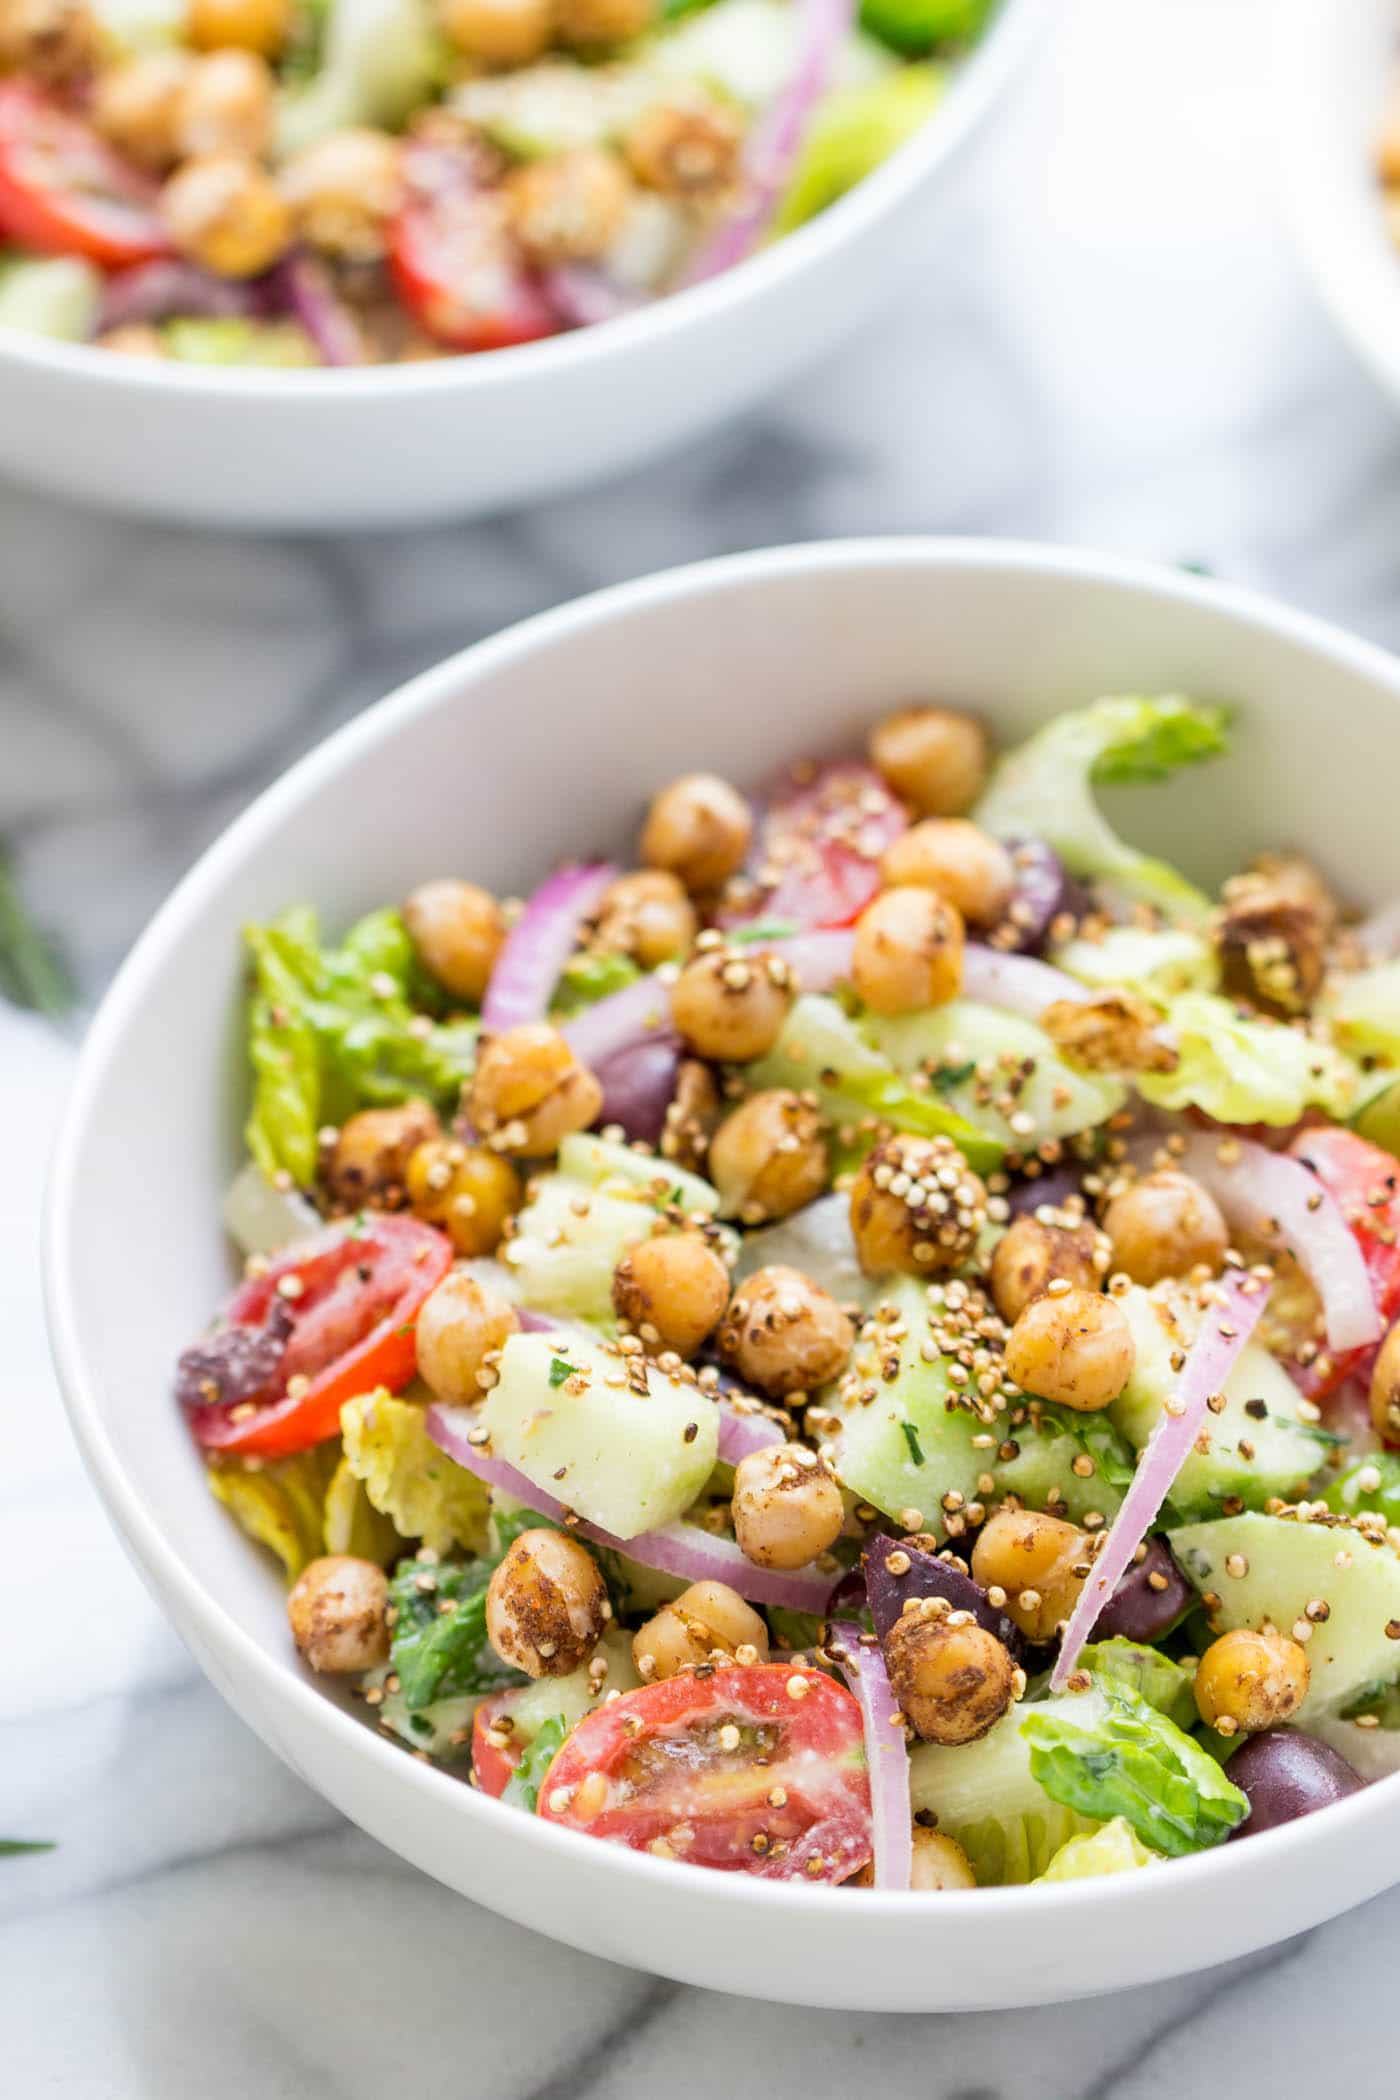 VEGAN CHOPPED SALAD with a tarragon tahini dressing and warm spiced chickpeas!